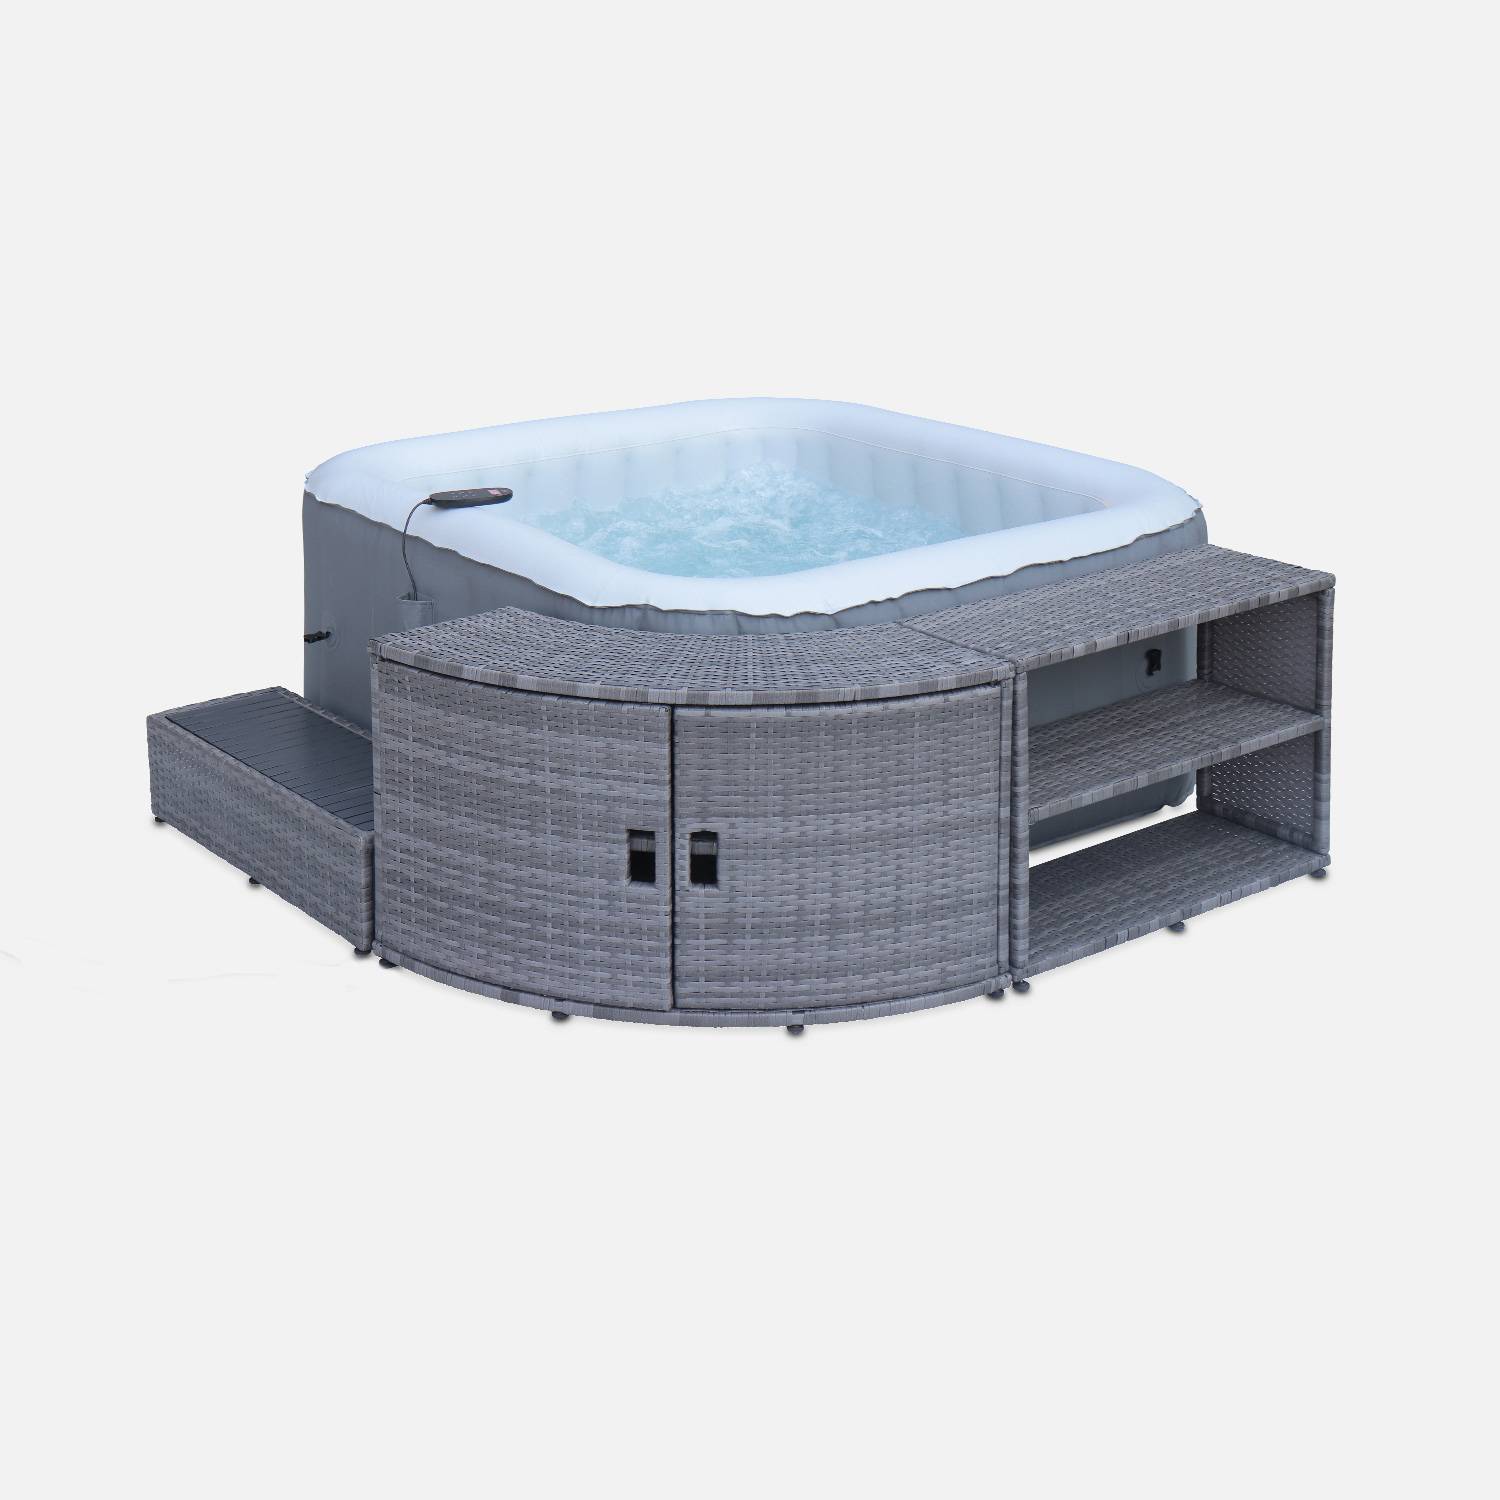 Grey polyrattan surround for square hot tub with cabinet, shelf and footstep,sweeek,Photo3